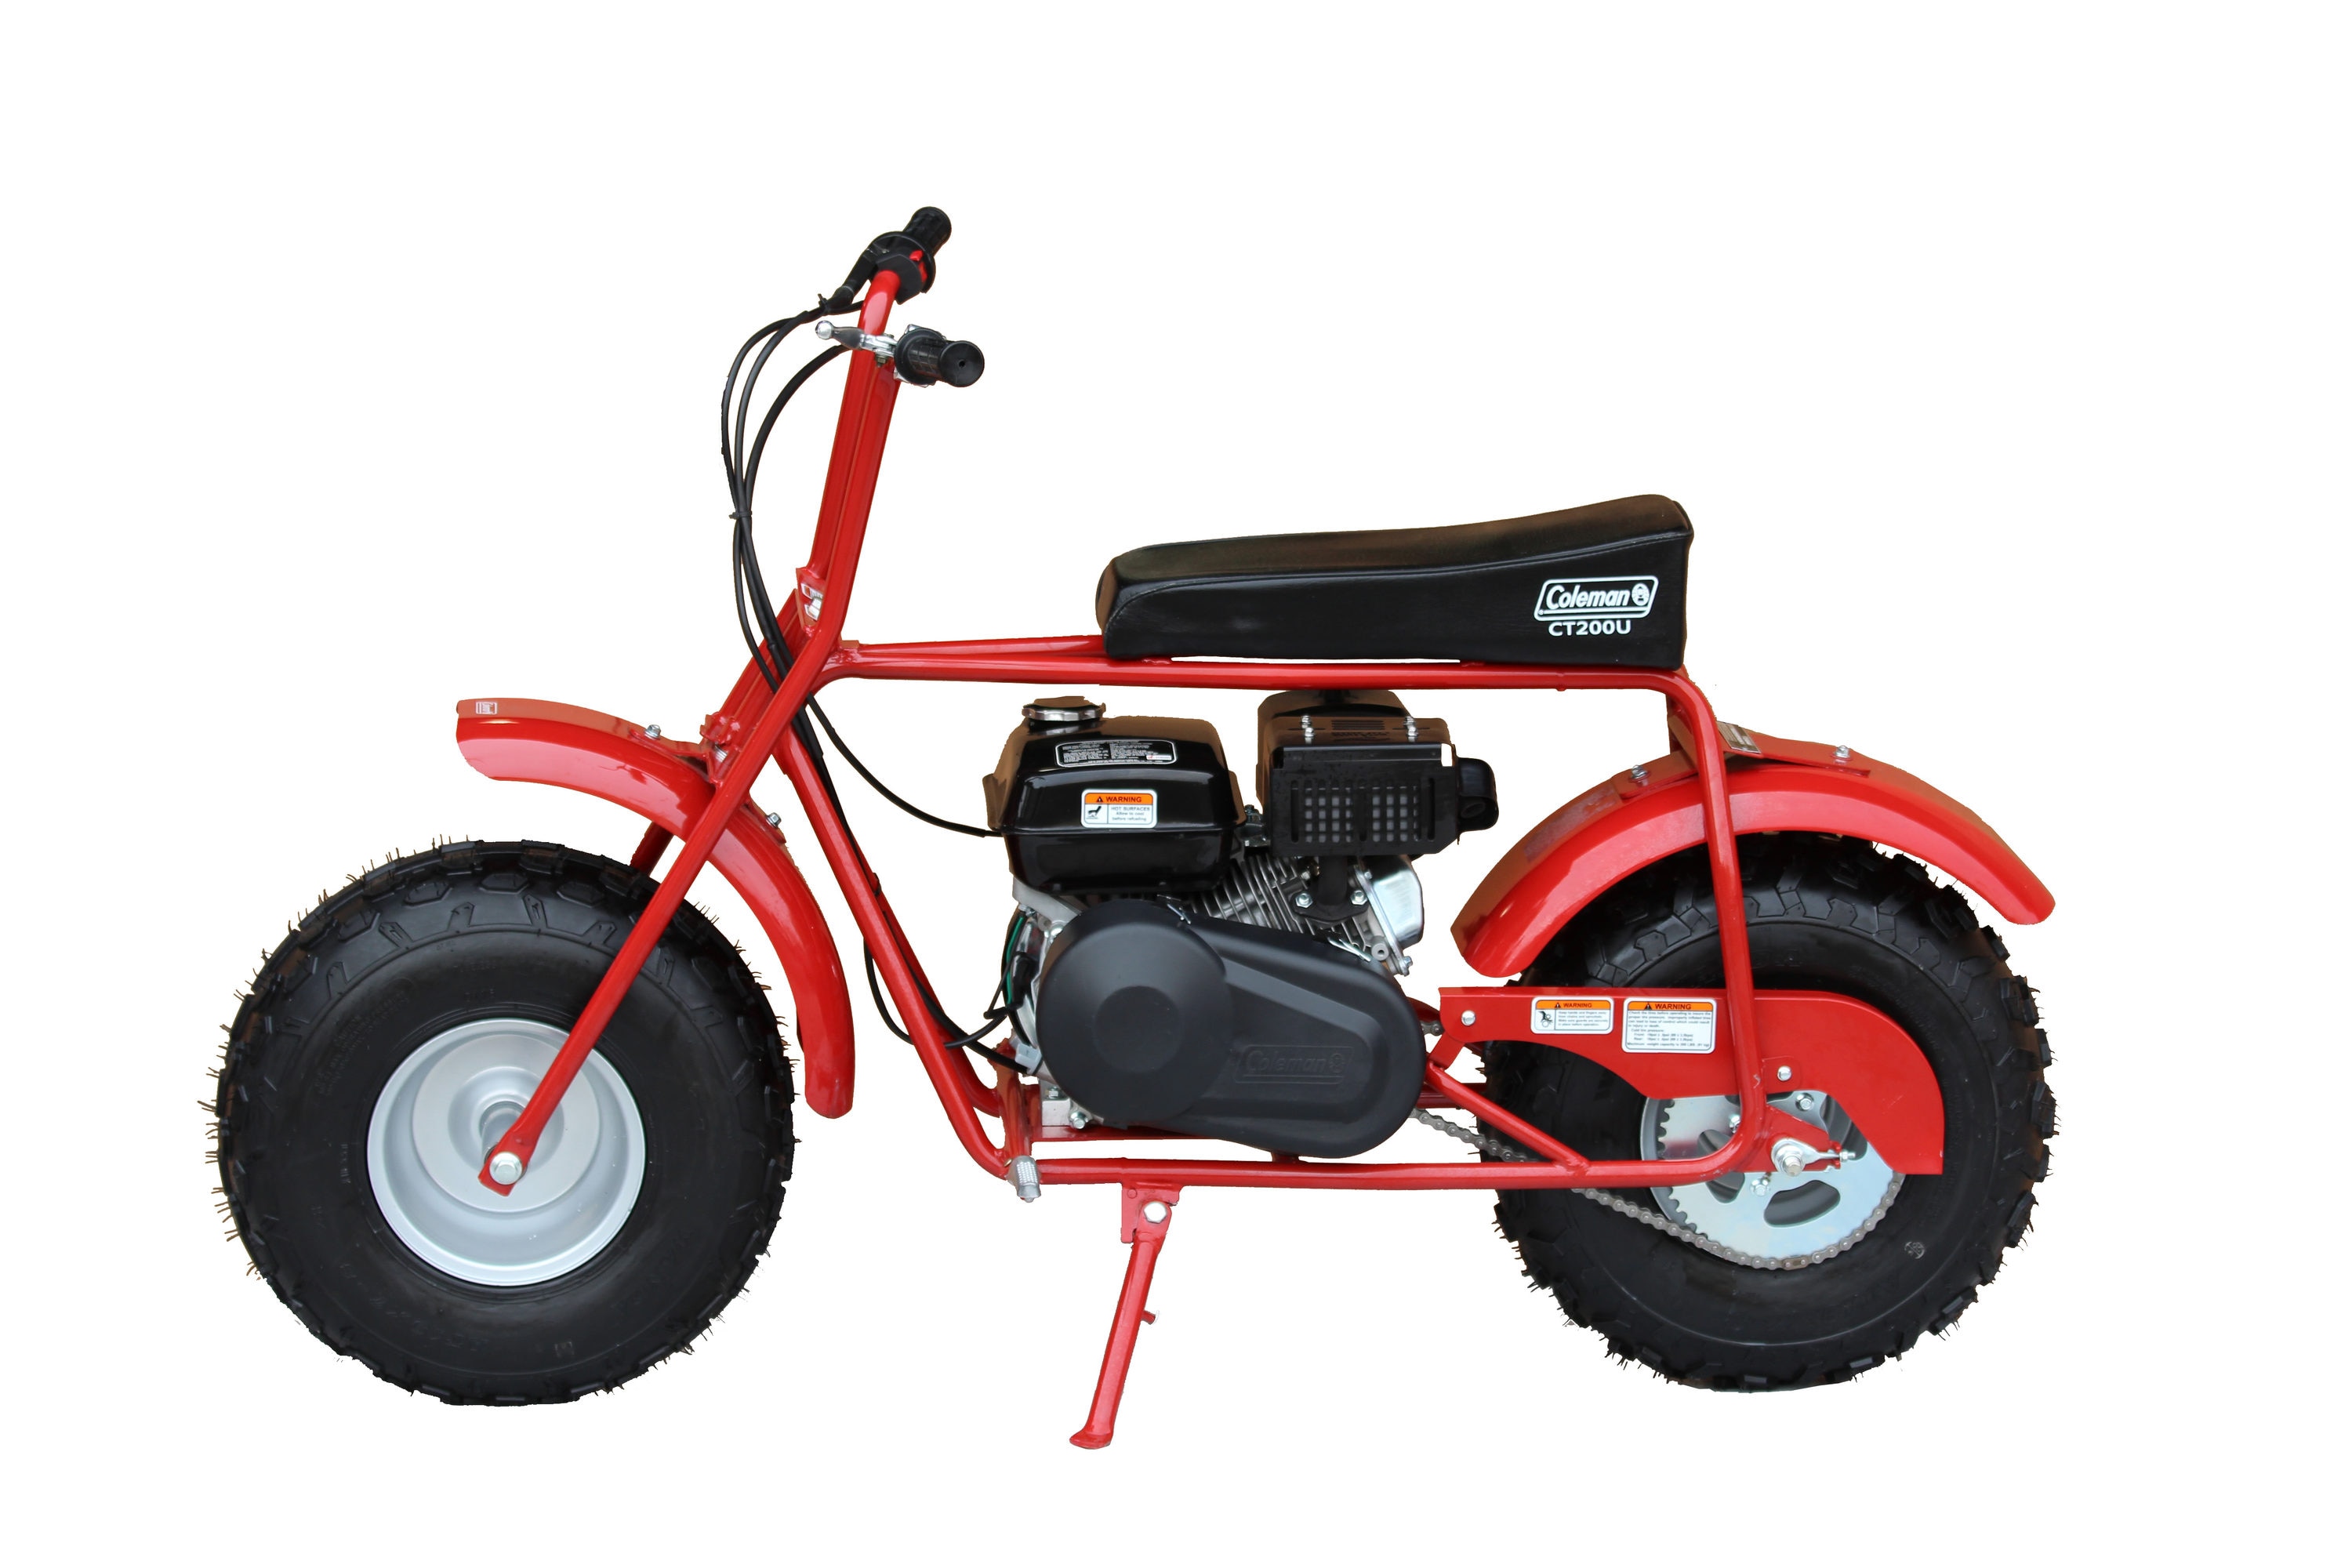 Red Frame Gas-Powered Mini Bike with 196CC Engine and Automatic Transmission, CARB Compliant | - Coleman Powersports CT200U-A